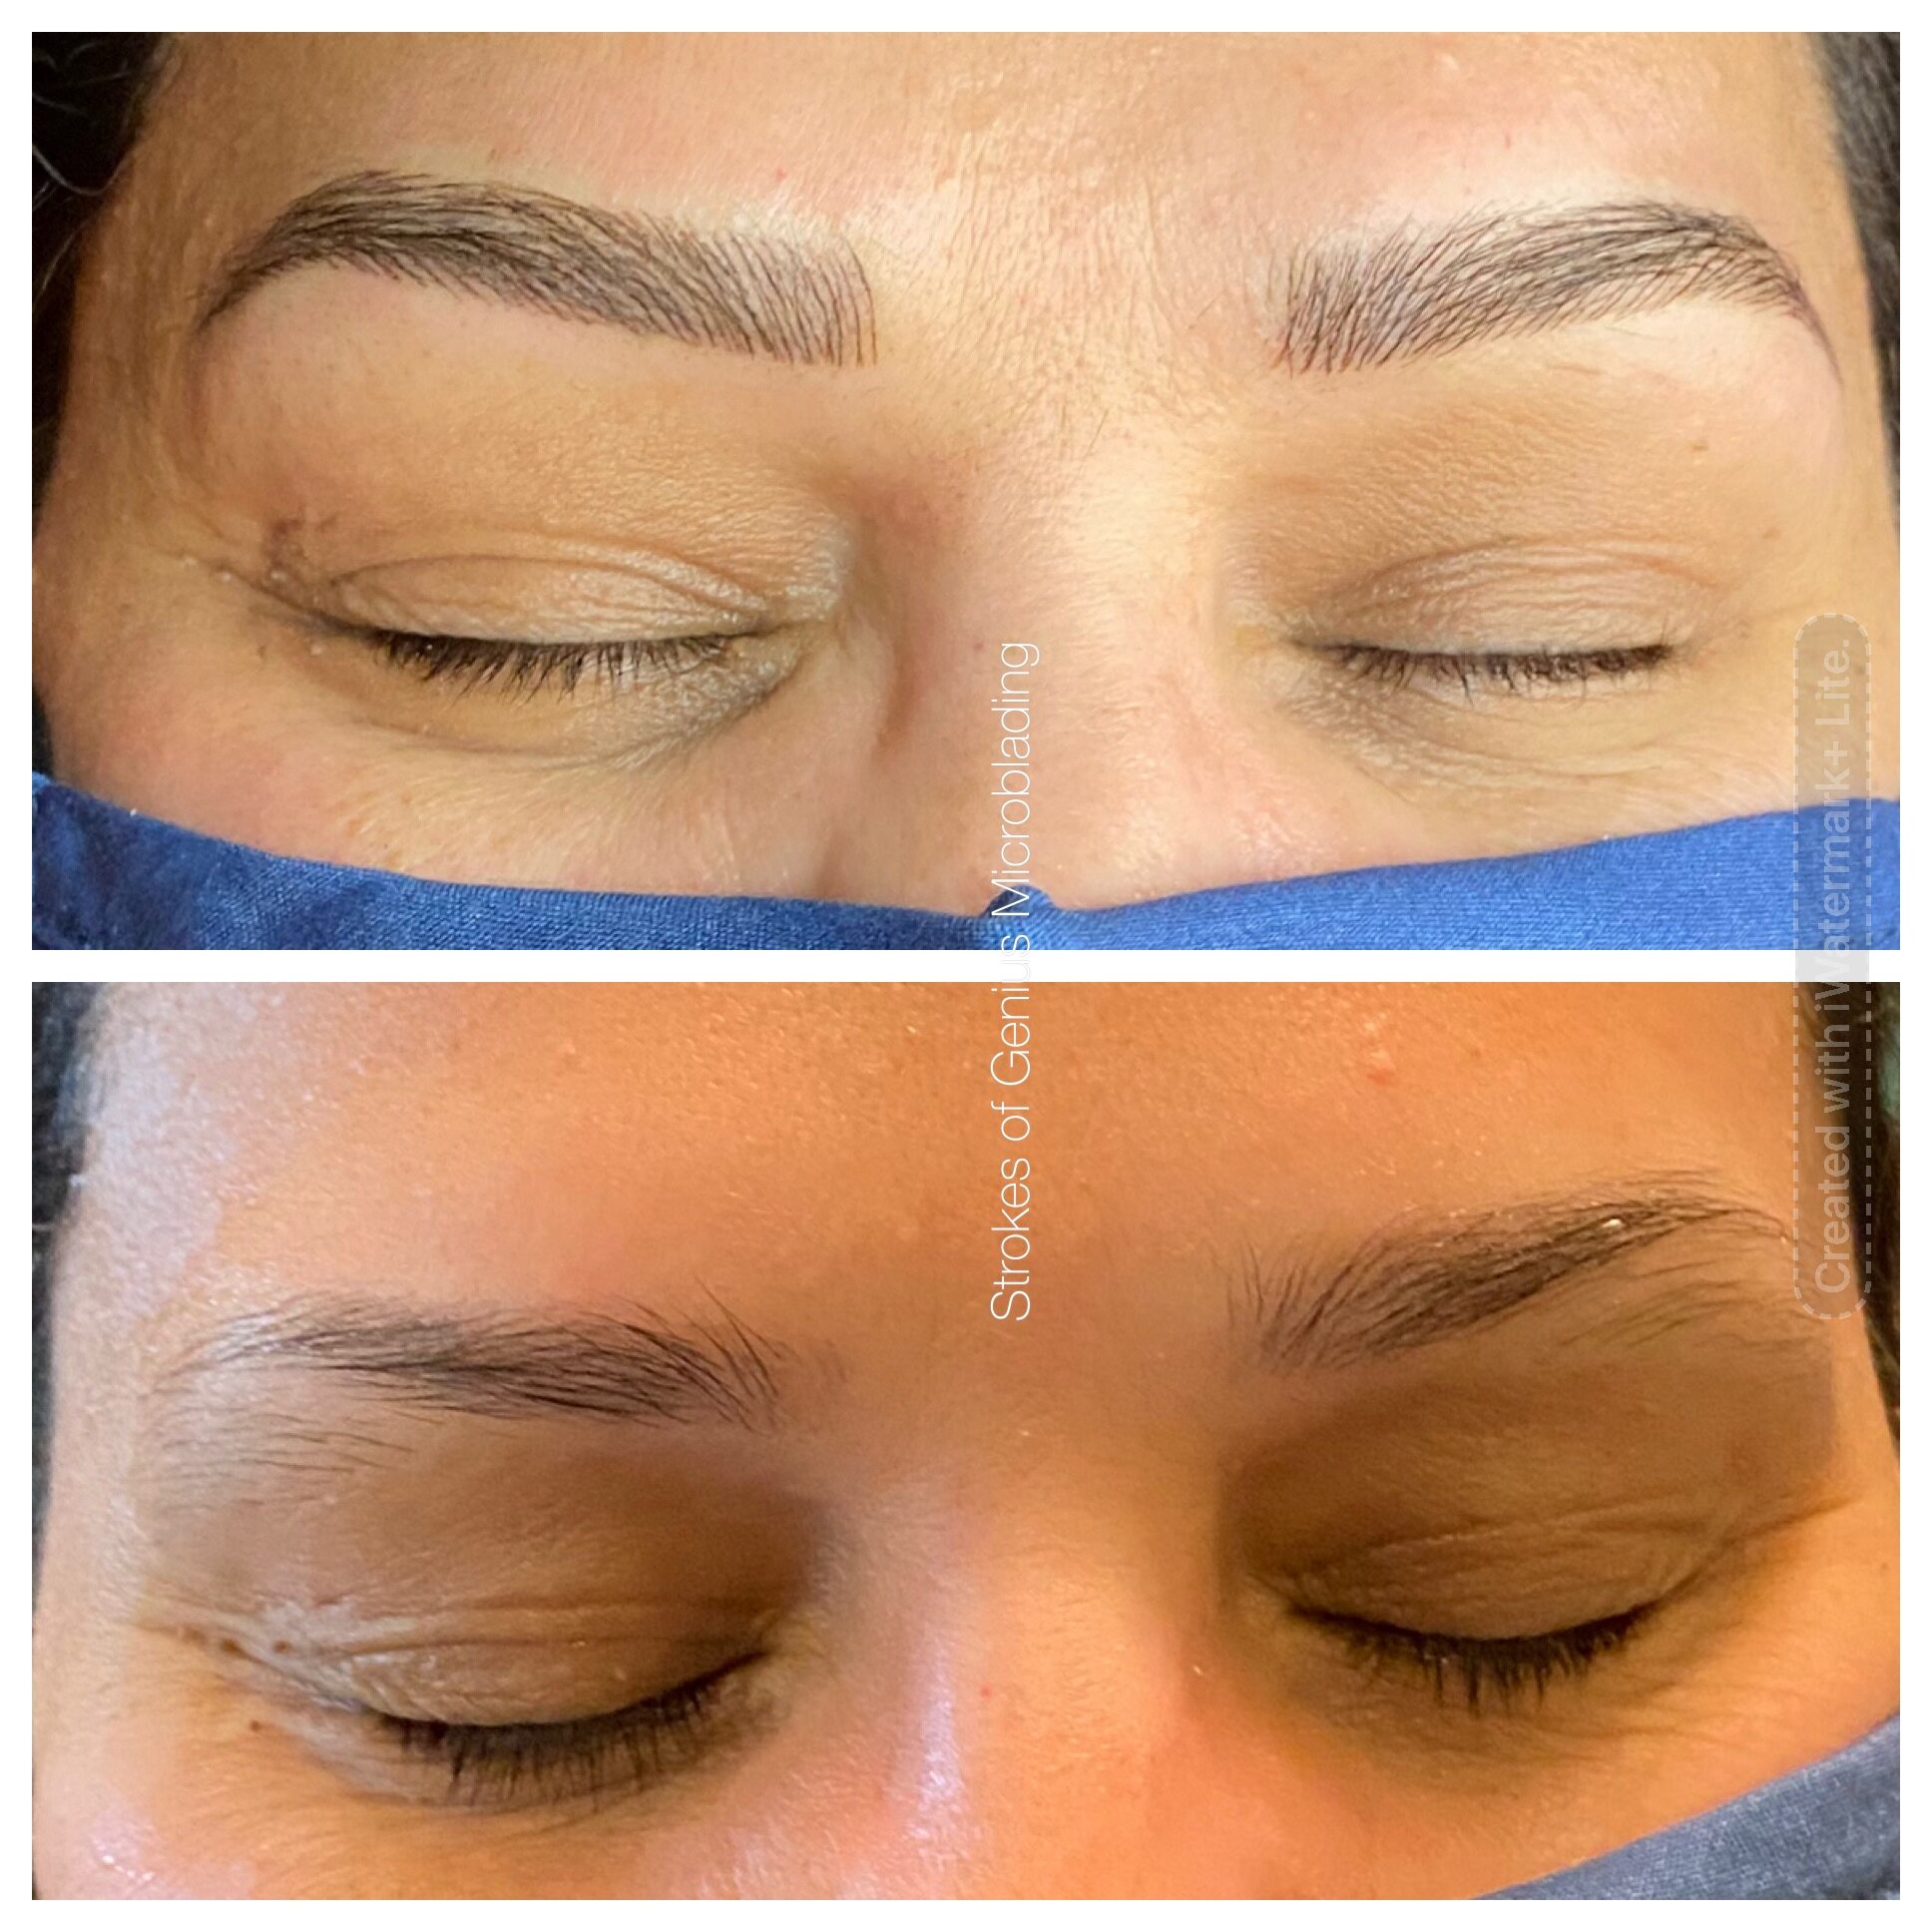 Is Shading with Microblading a Good Idea?